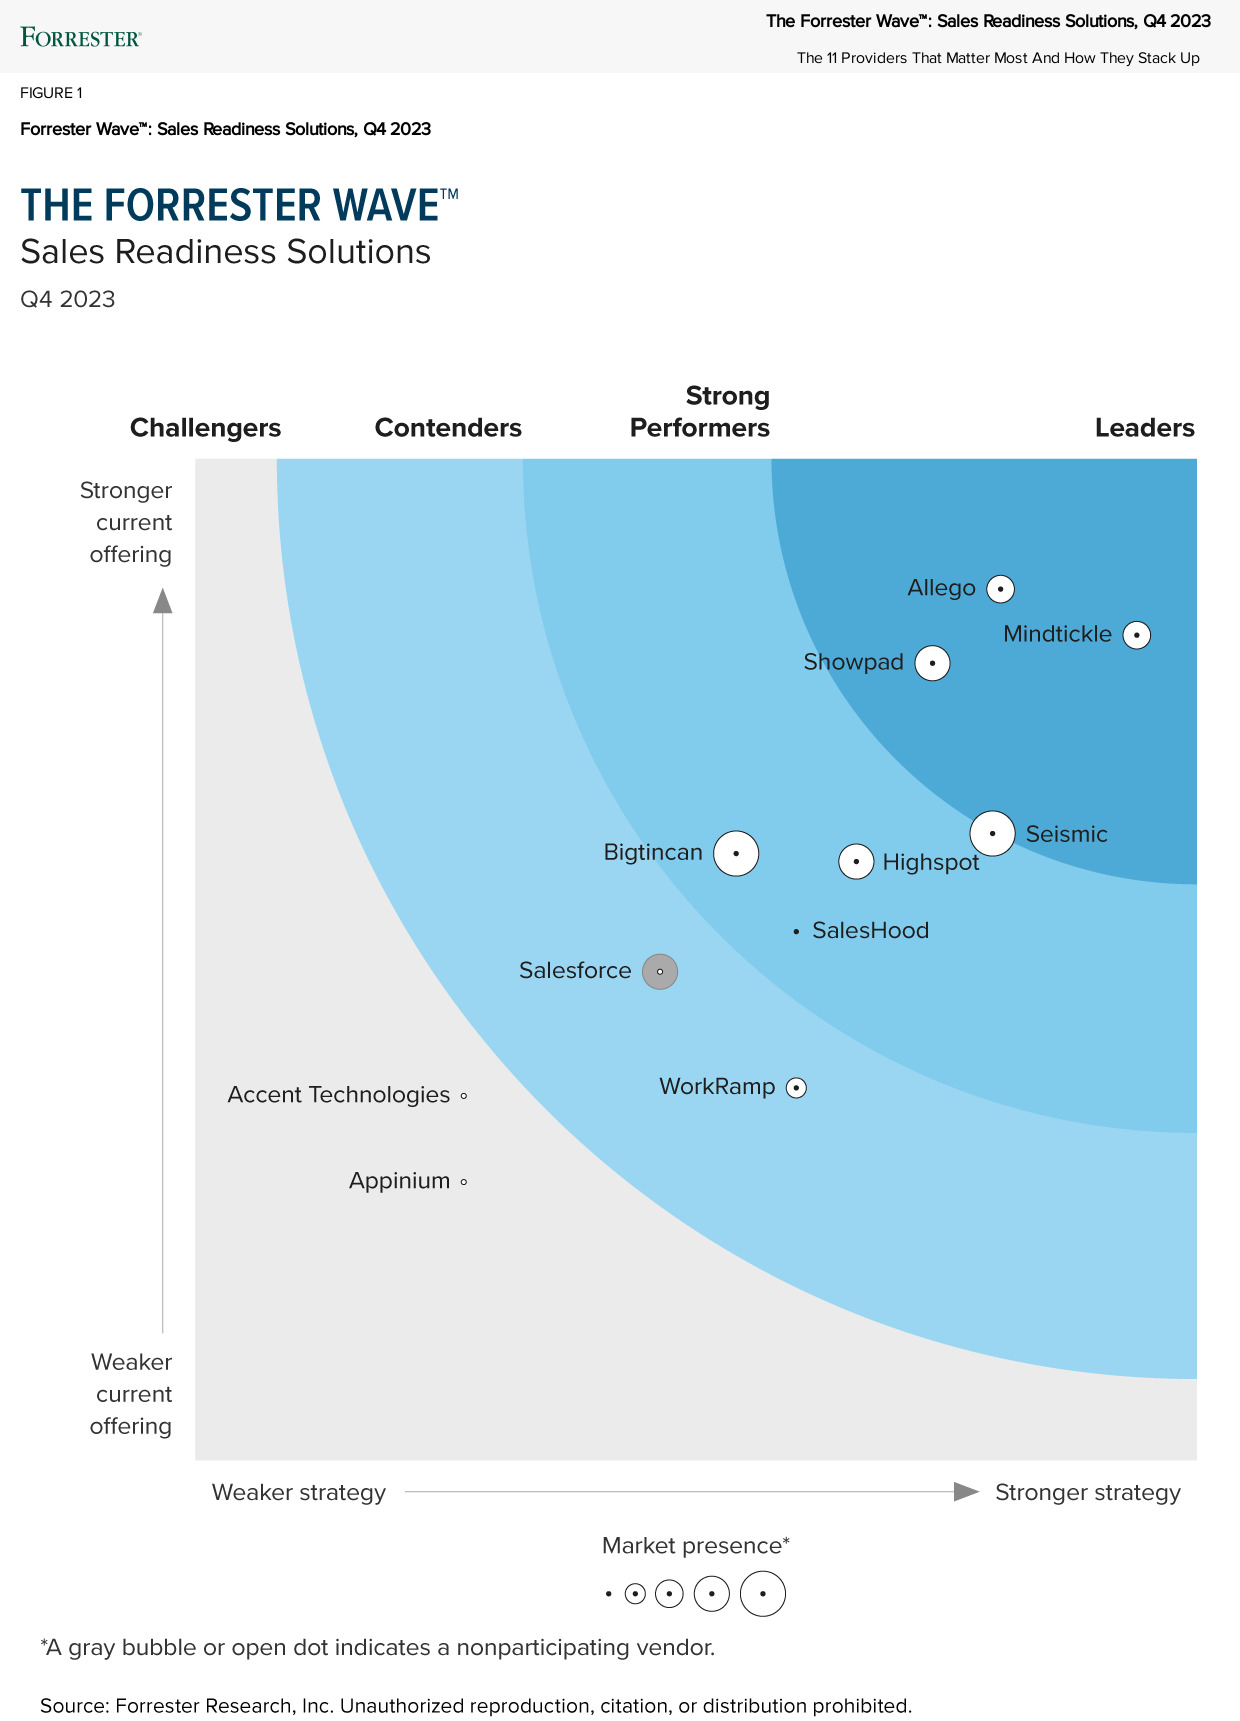 Forrester-Wave-Sales-Readiness-Solutions-Q4-2023